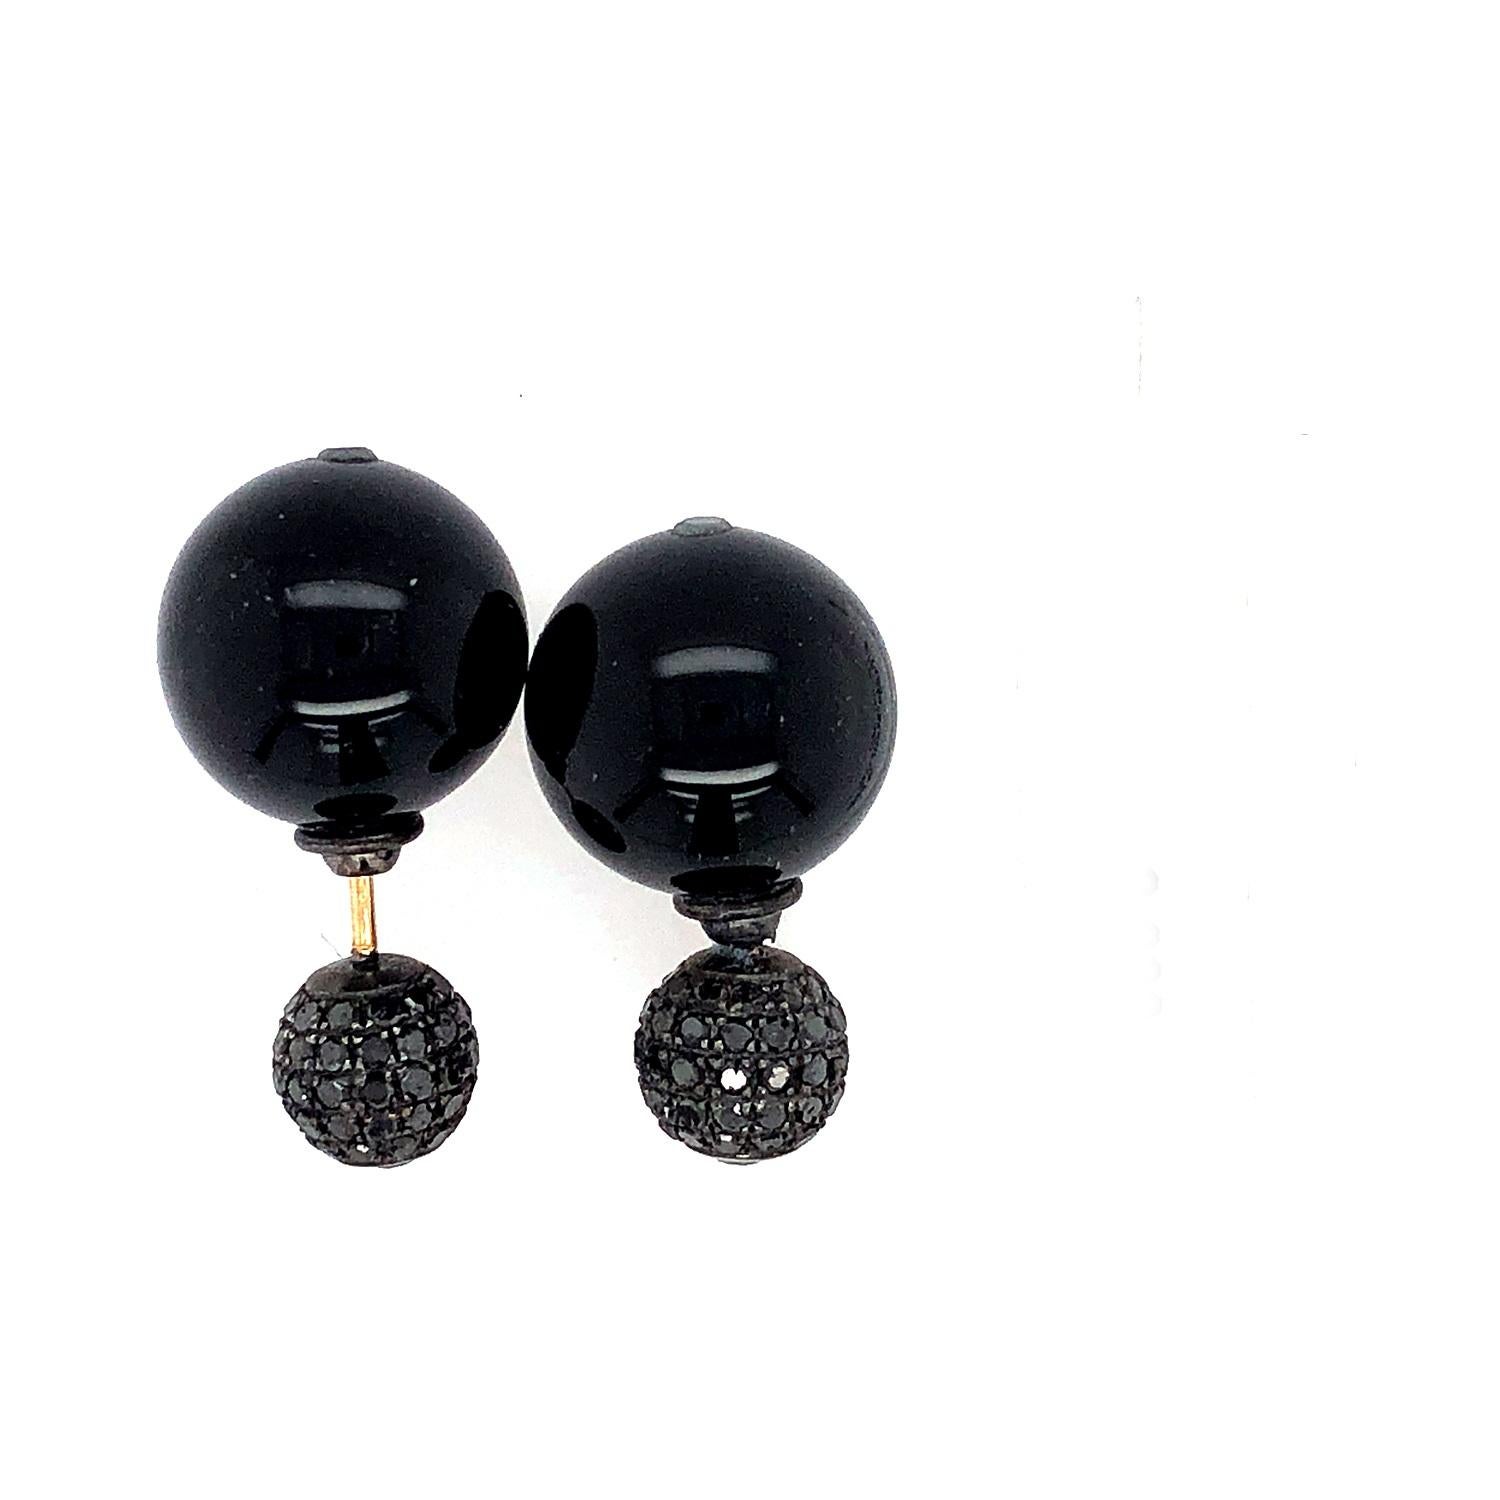 Black Onyx & Pave Diamond Ball Tunnel Earrings Made In 14k Gold & Silver In New Condition For Sale In New York, NY